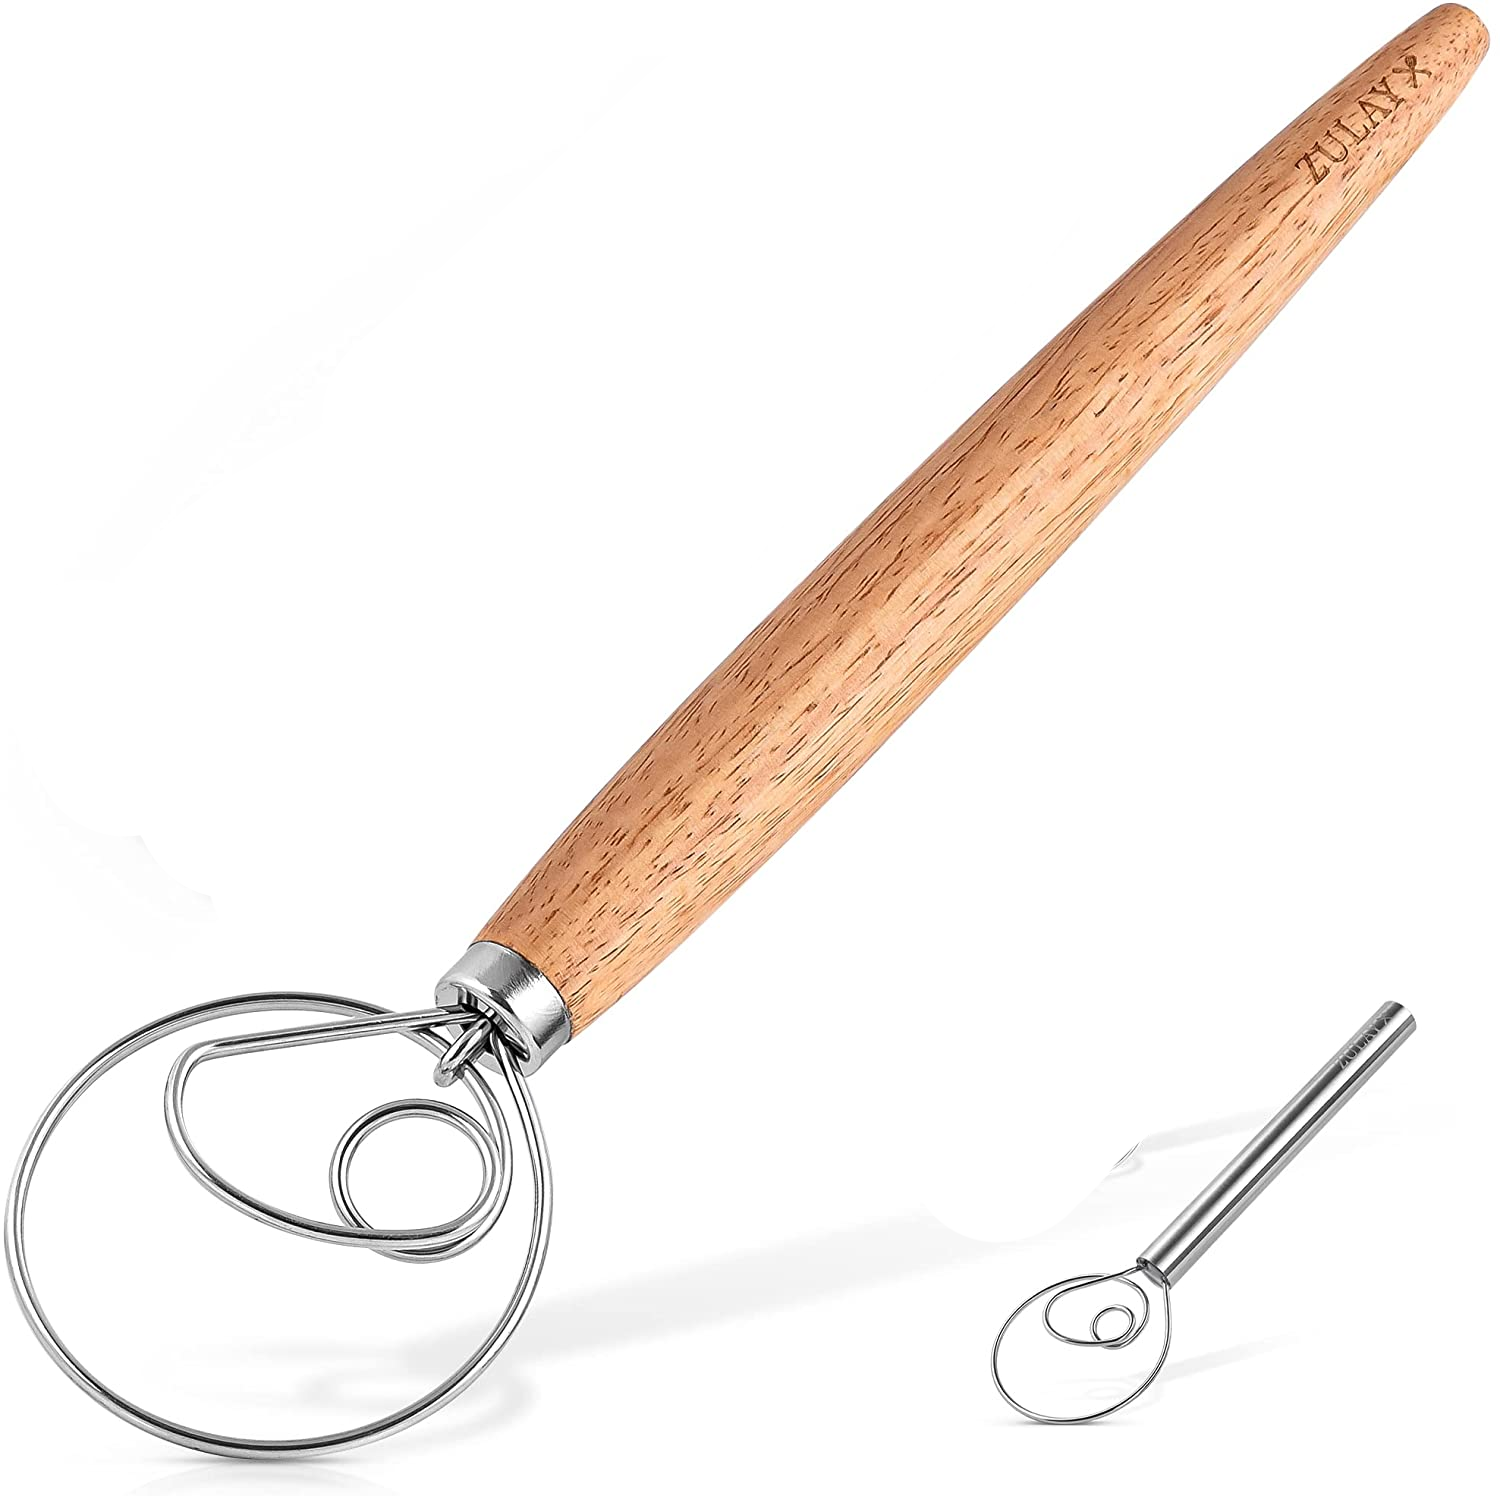 13 Inch Danish Dough Whisk - Large Wooden or Stainless Steel Whisk wit